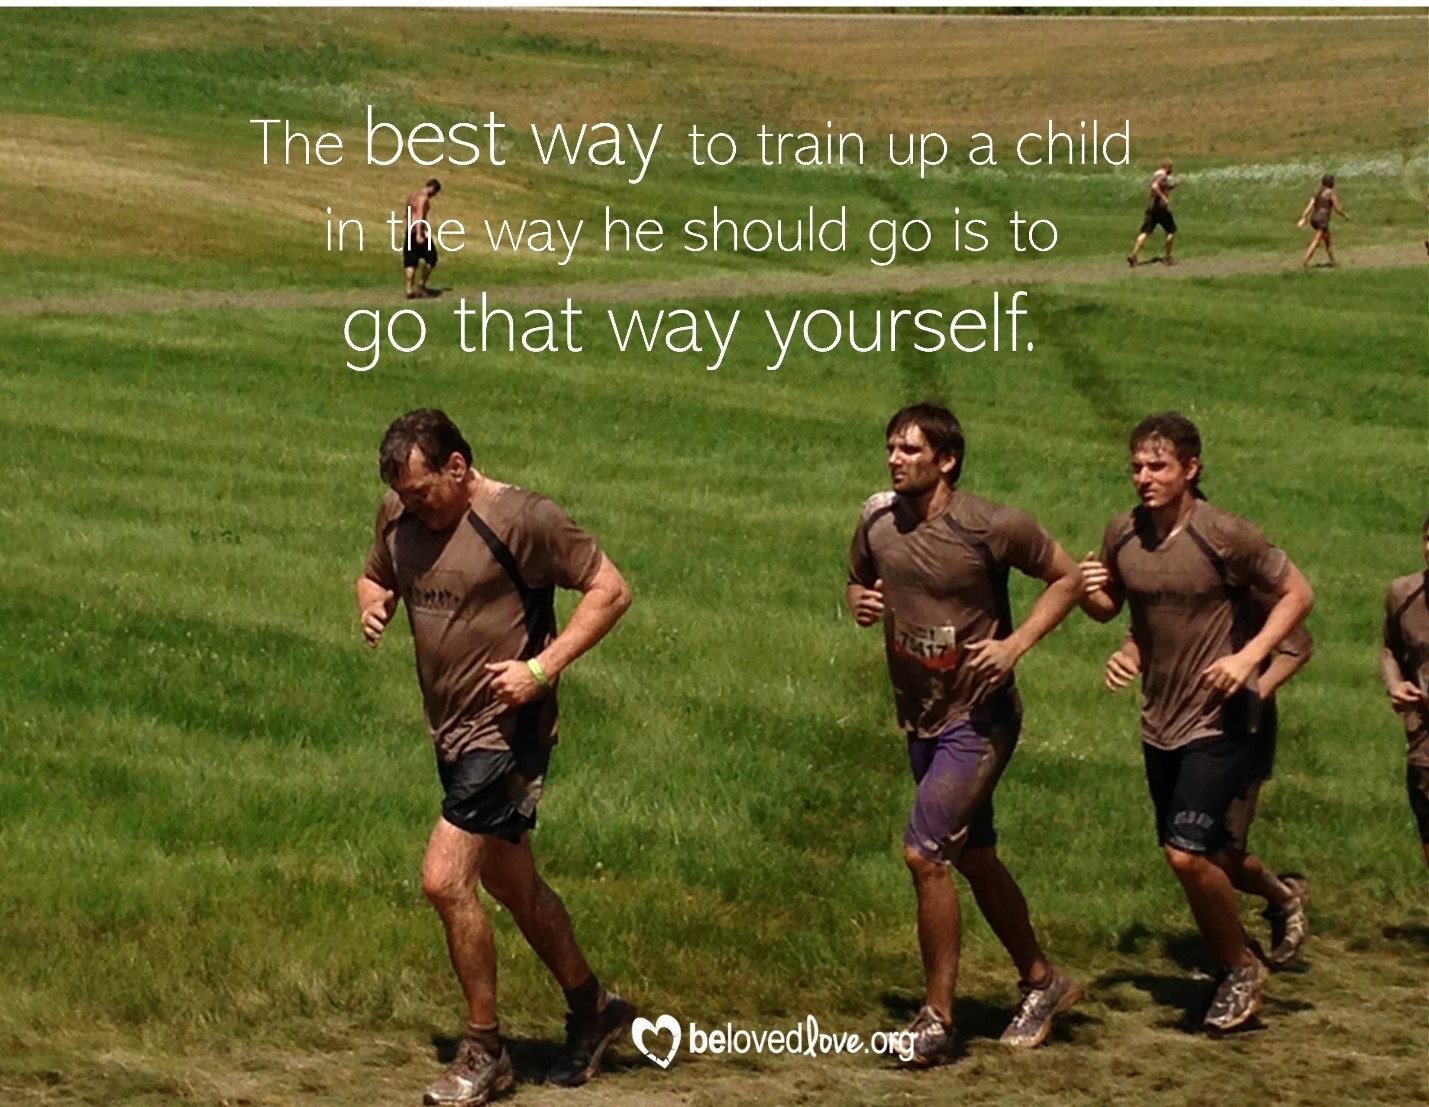 the best way to train up a child in the way he should go is to go that way yourself